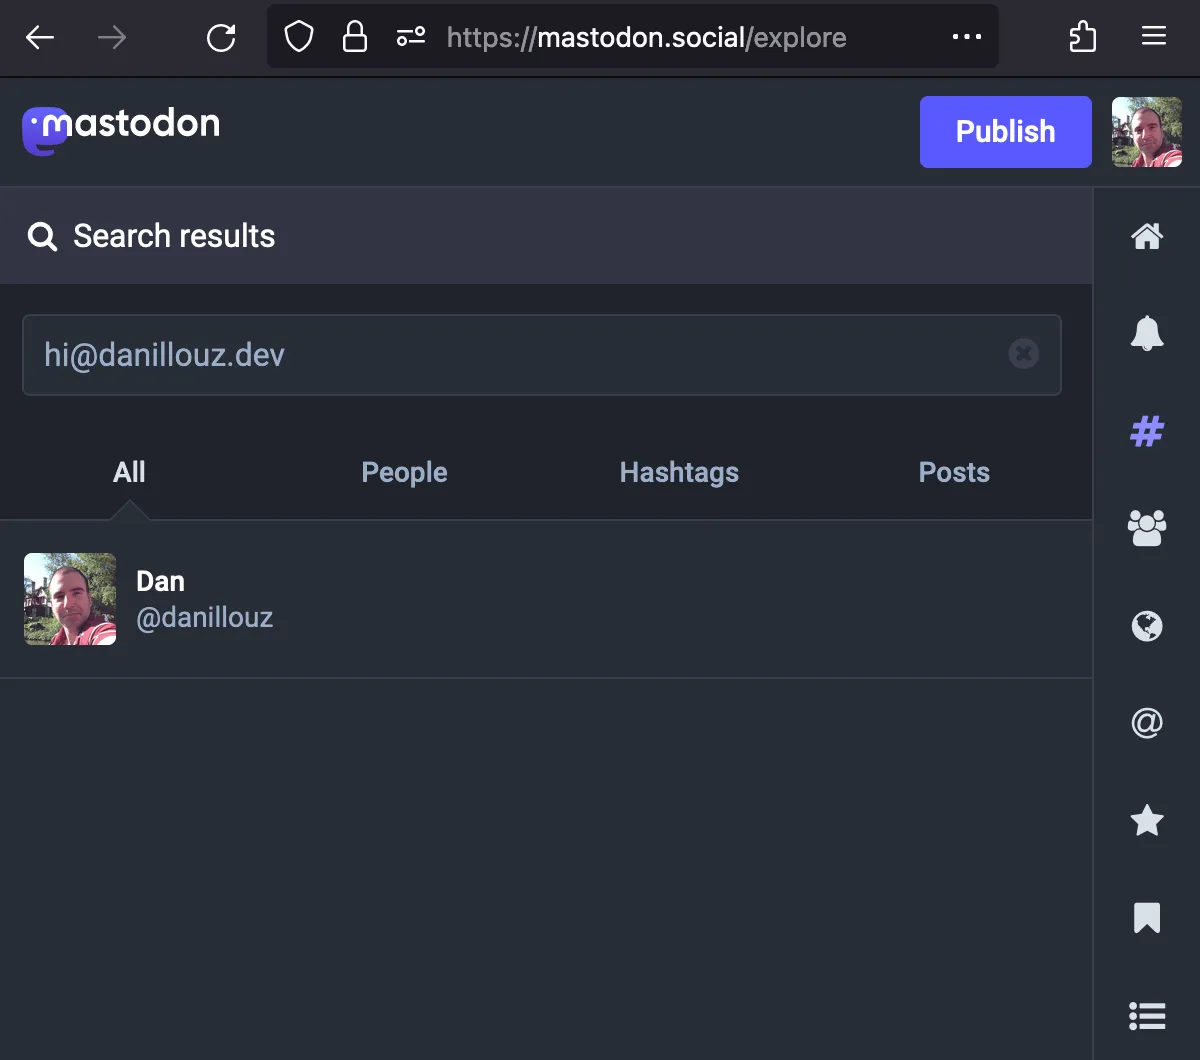 Mastodon search results, showing a search hit after searching for hi@danillouz.dev.